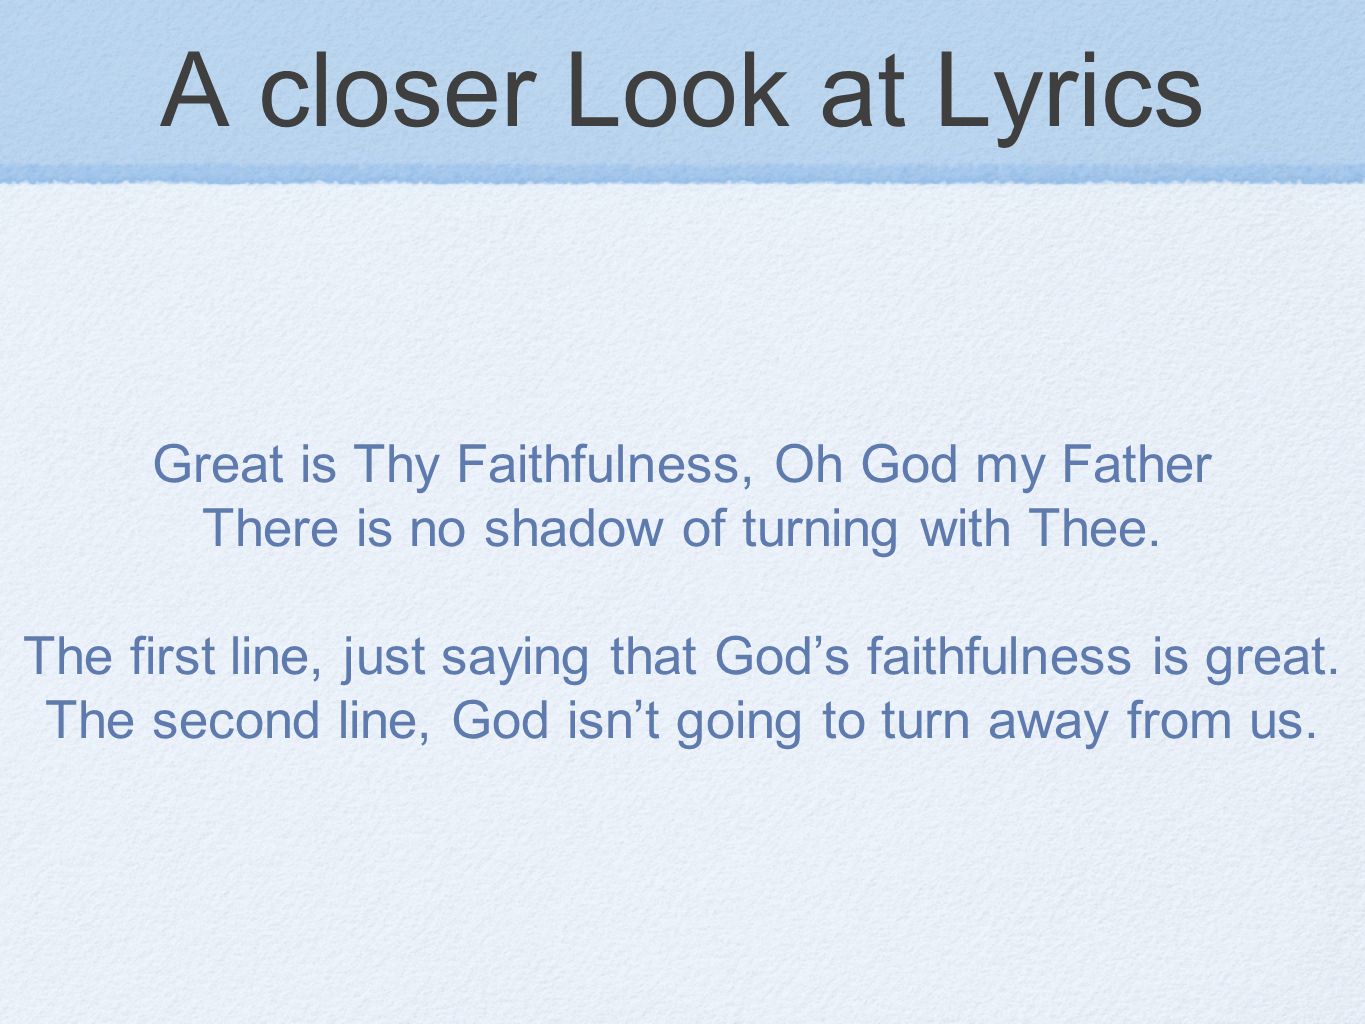 A closer Look at Lyrics Great is Thy Faithfulness, Oh God my Father There is no shadow of turning with Thee.